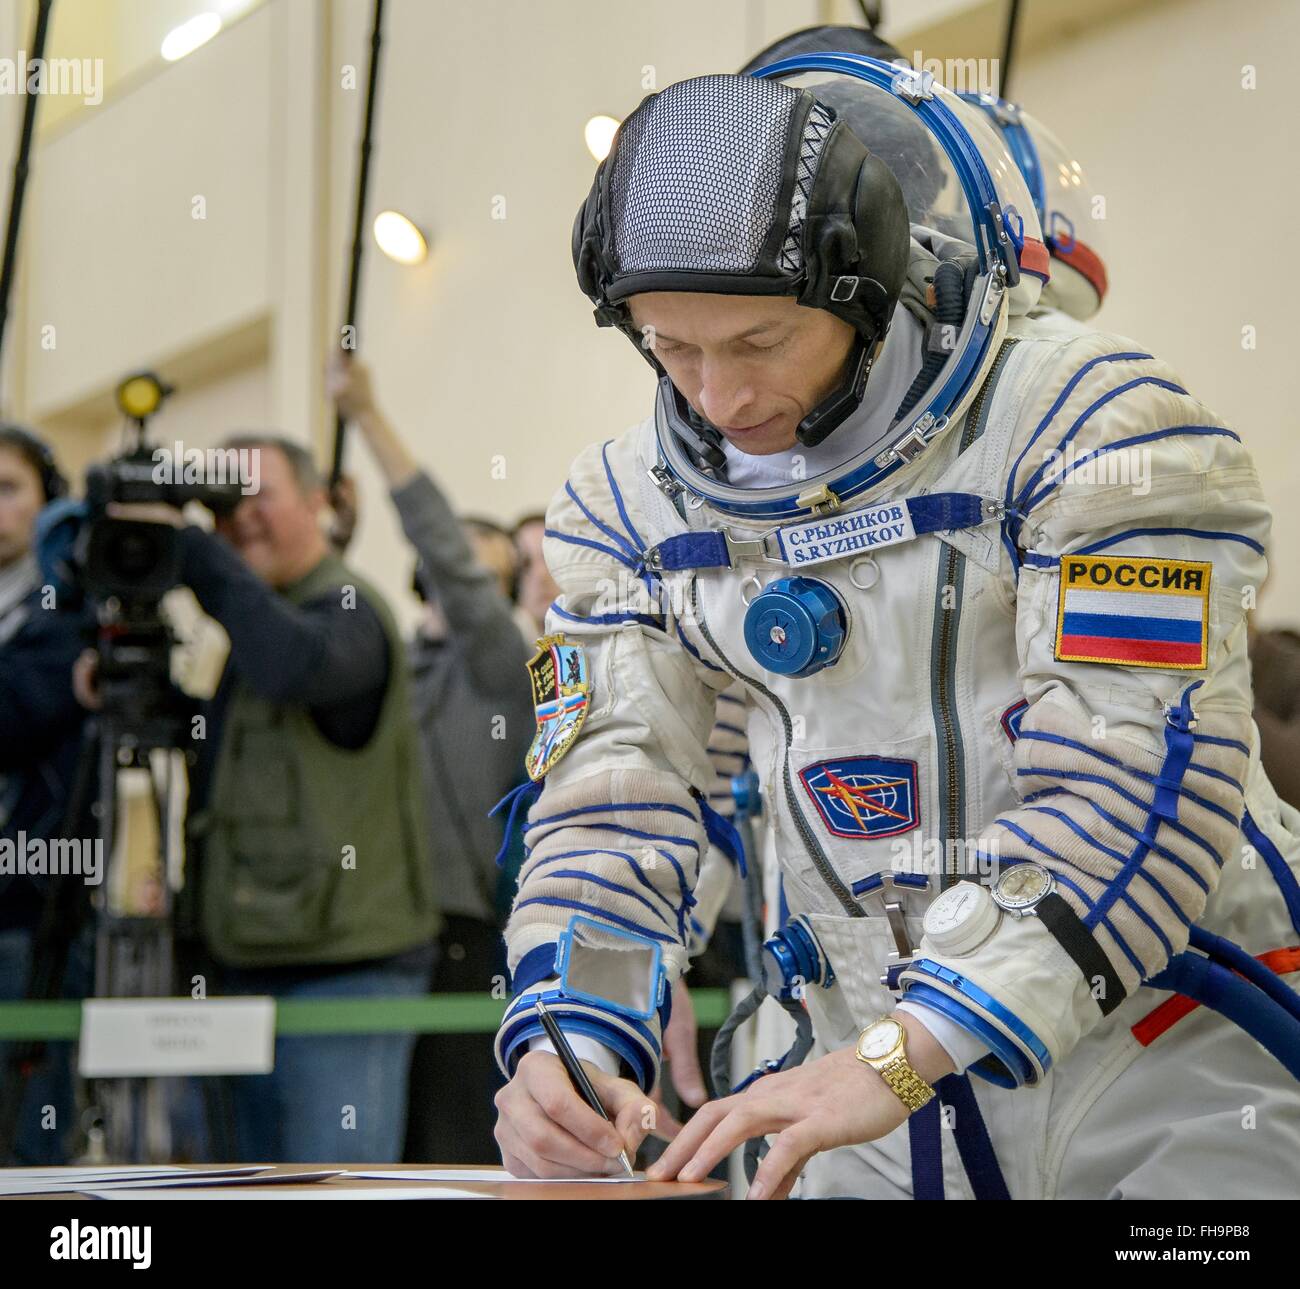 Star City, Russia. 24th February, 2016. International Space Station Expedition 47 backup crew member Russian cosmonaut Sergei Ryzhikov signs documents during Soyuz qualification exams at the Gagarin Cosmonaut Training Center February 24, 2016 in Star City, Russia. Stock Photo